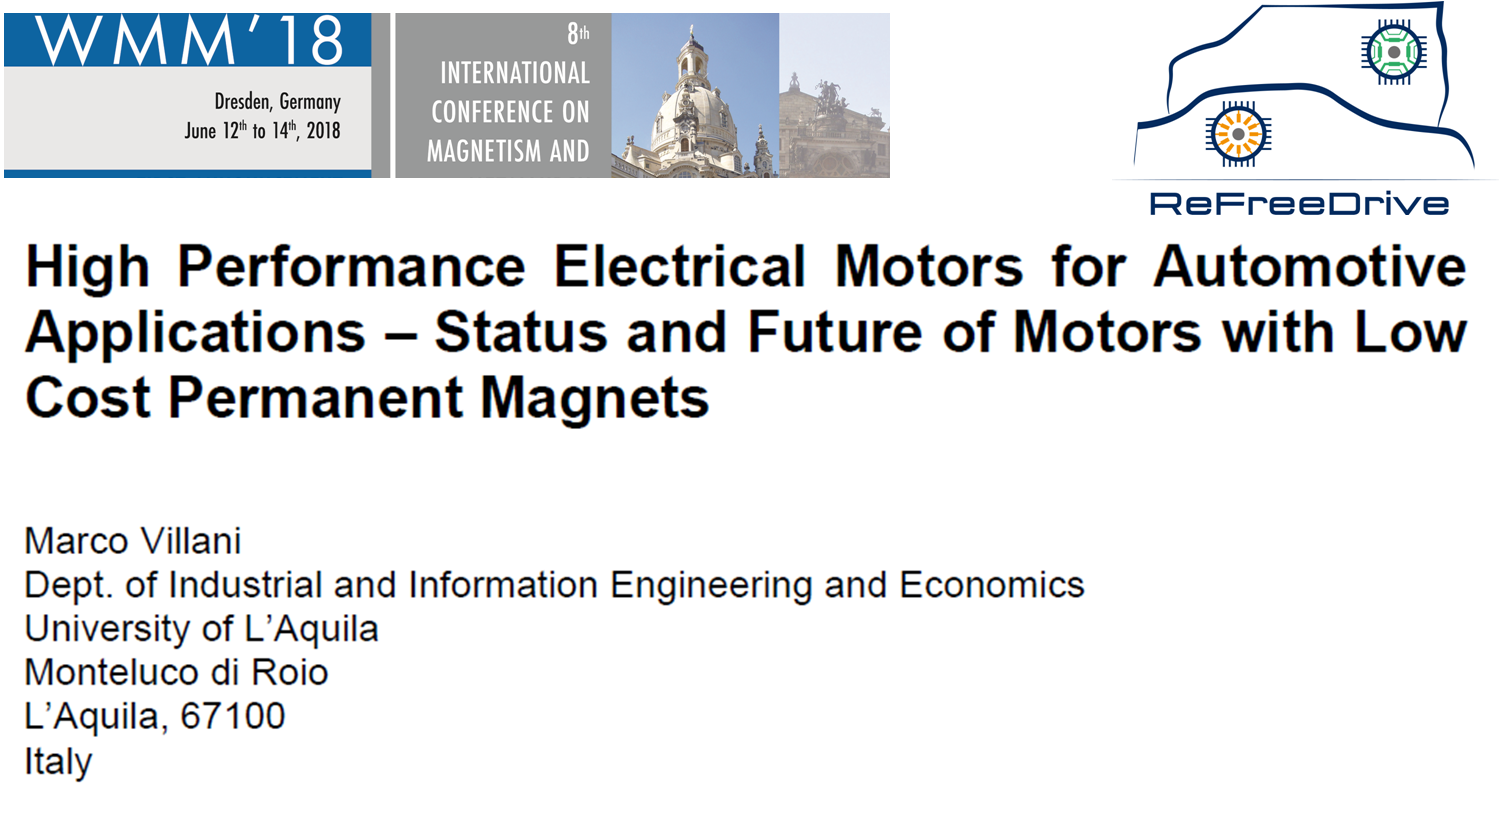 WMM Paper on High Performance Electrical Motors for Automotive Applications